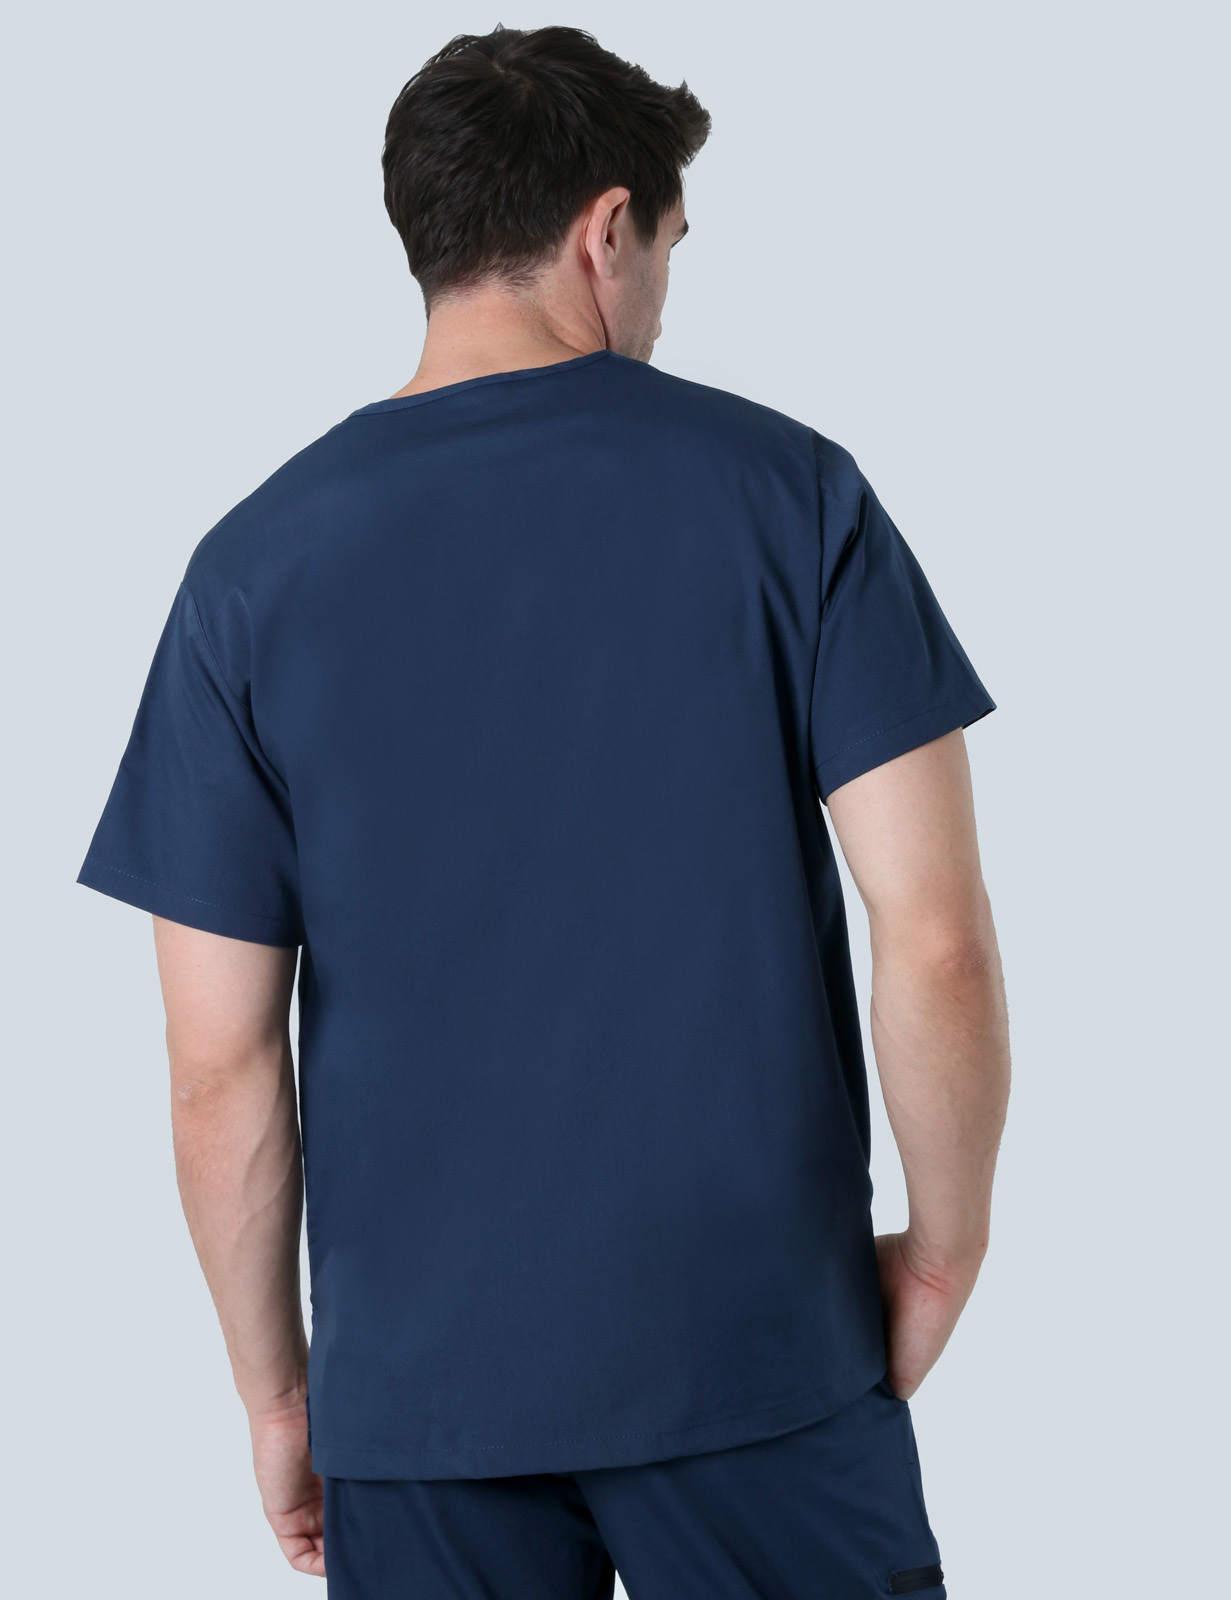 Men's Fit Solid Scrub Top - Navy - X Small - 1